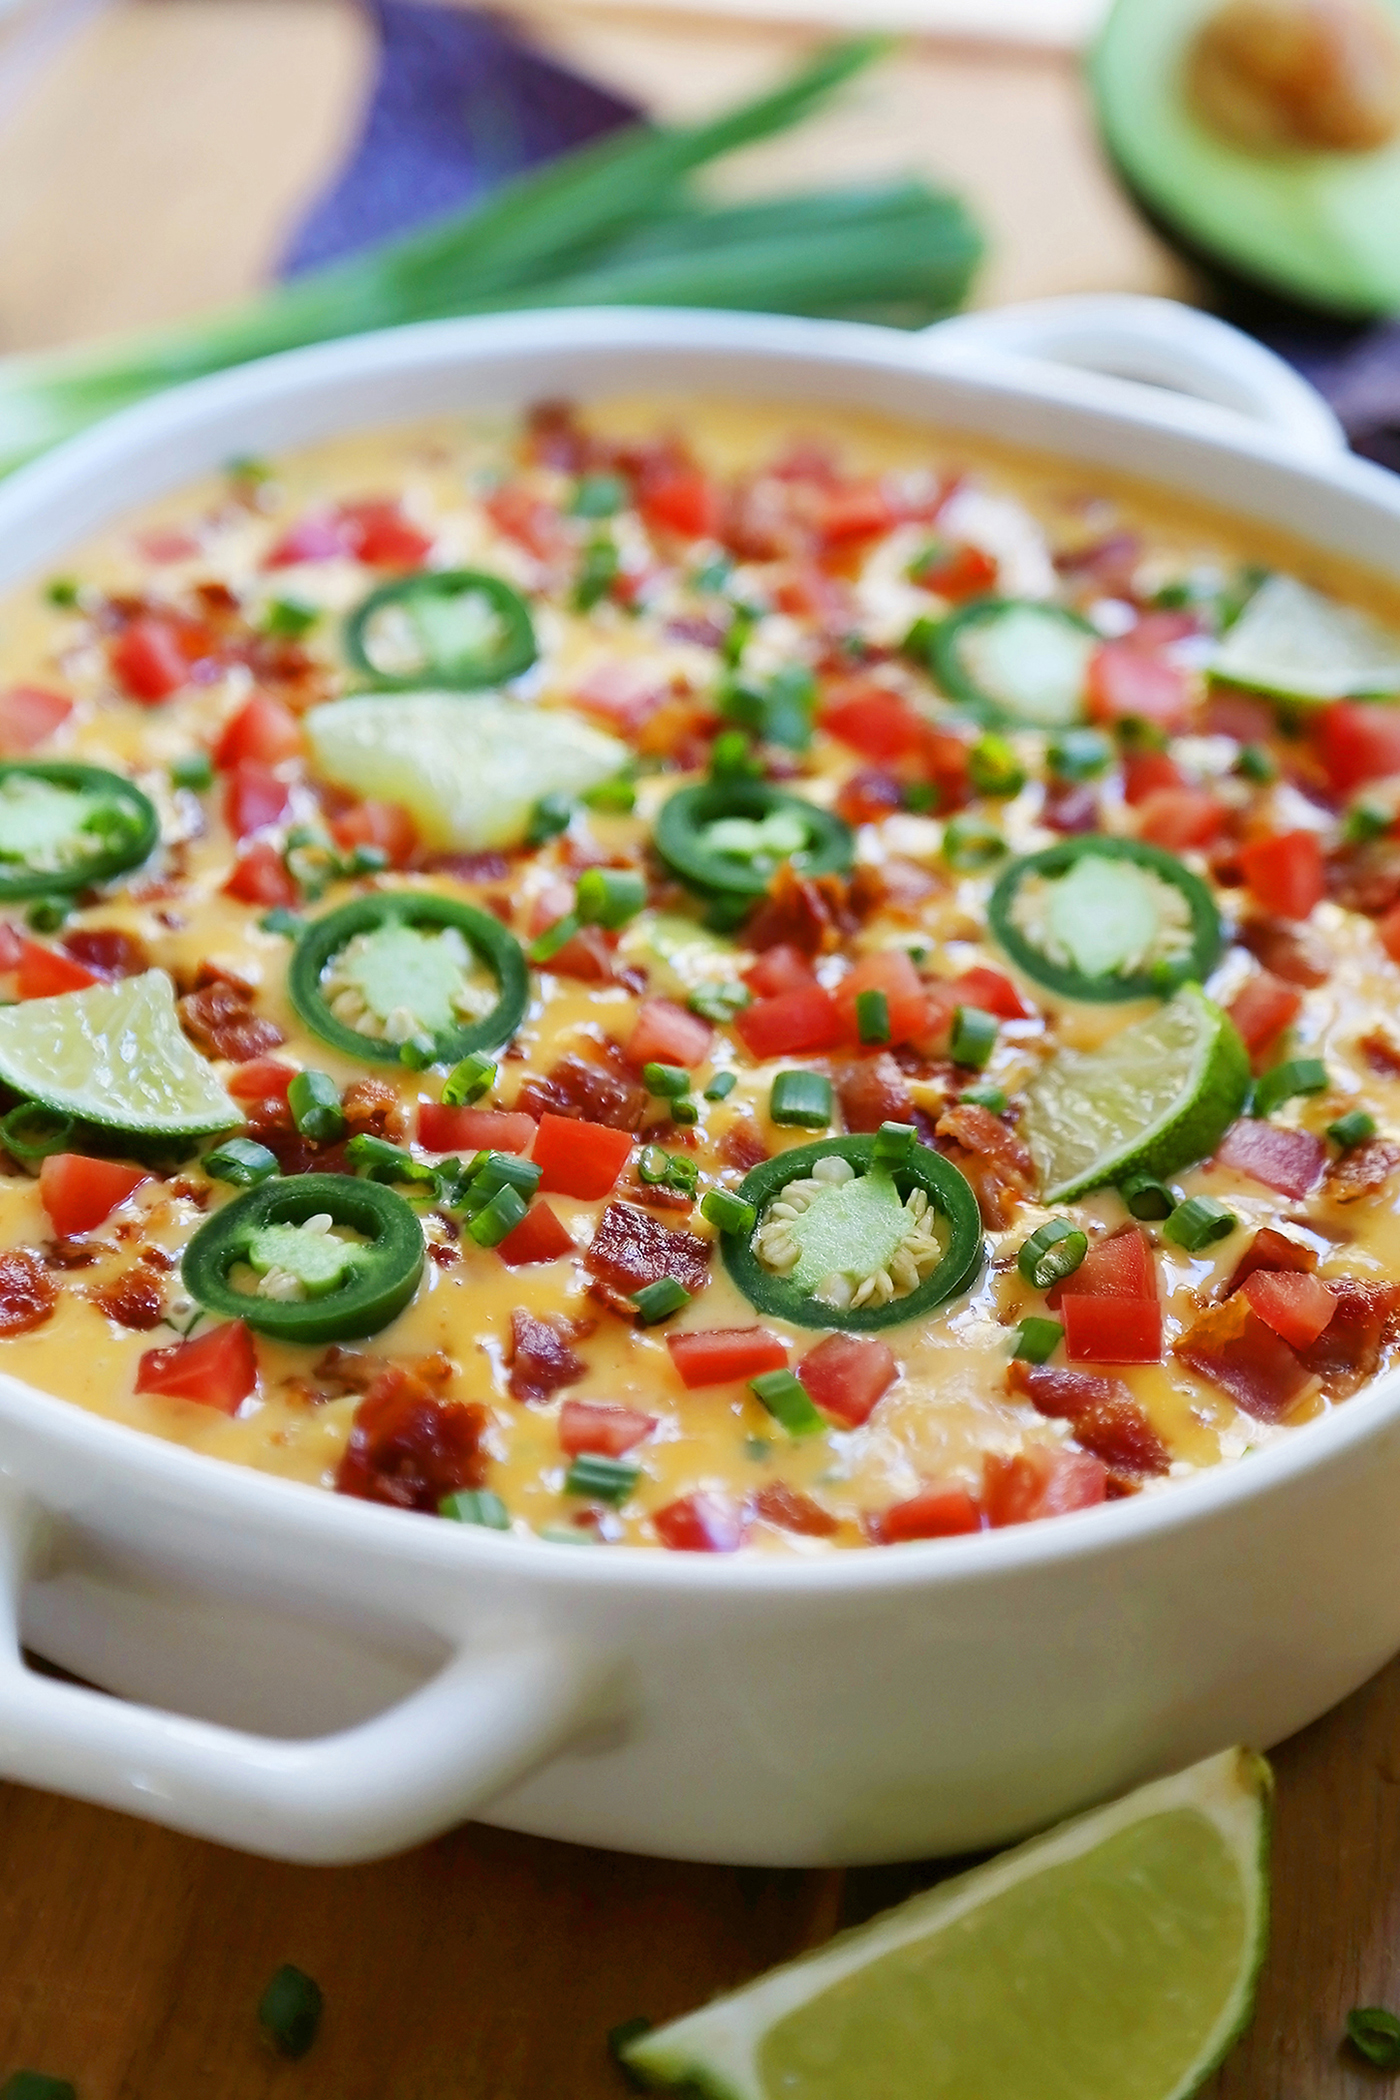 2-Ingredient CrockPot Queso Dip - So easy, cheesy and full of flavor for holiday parties and game day fun. Load it up with bacon, tomatoes, jalapenos and your favorite fixin's! Thecomfortofcooking.com